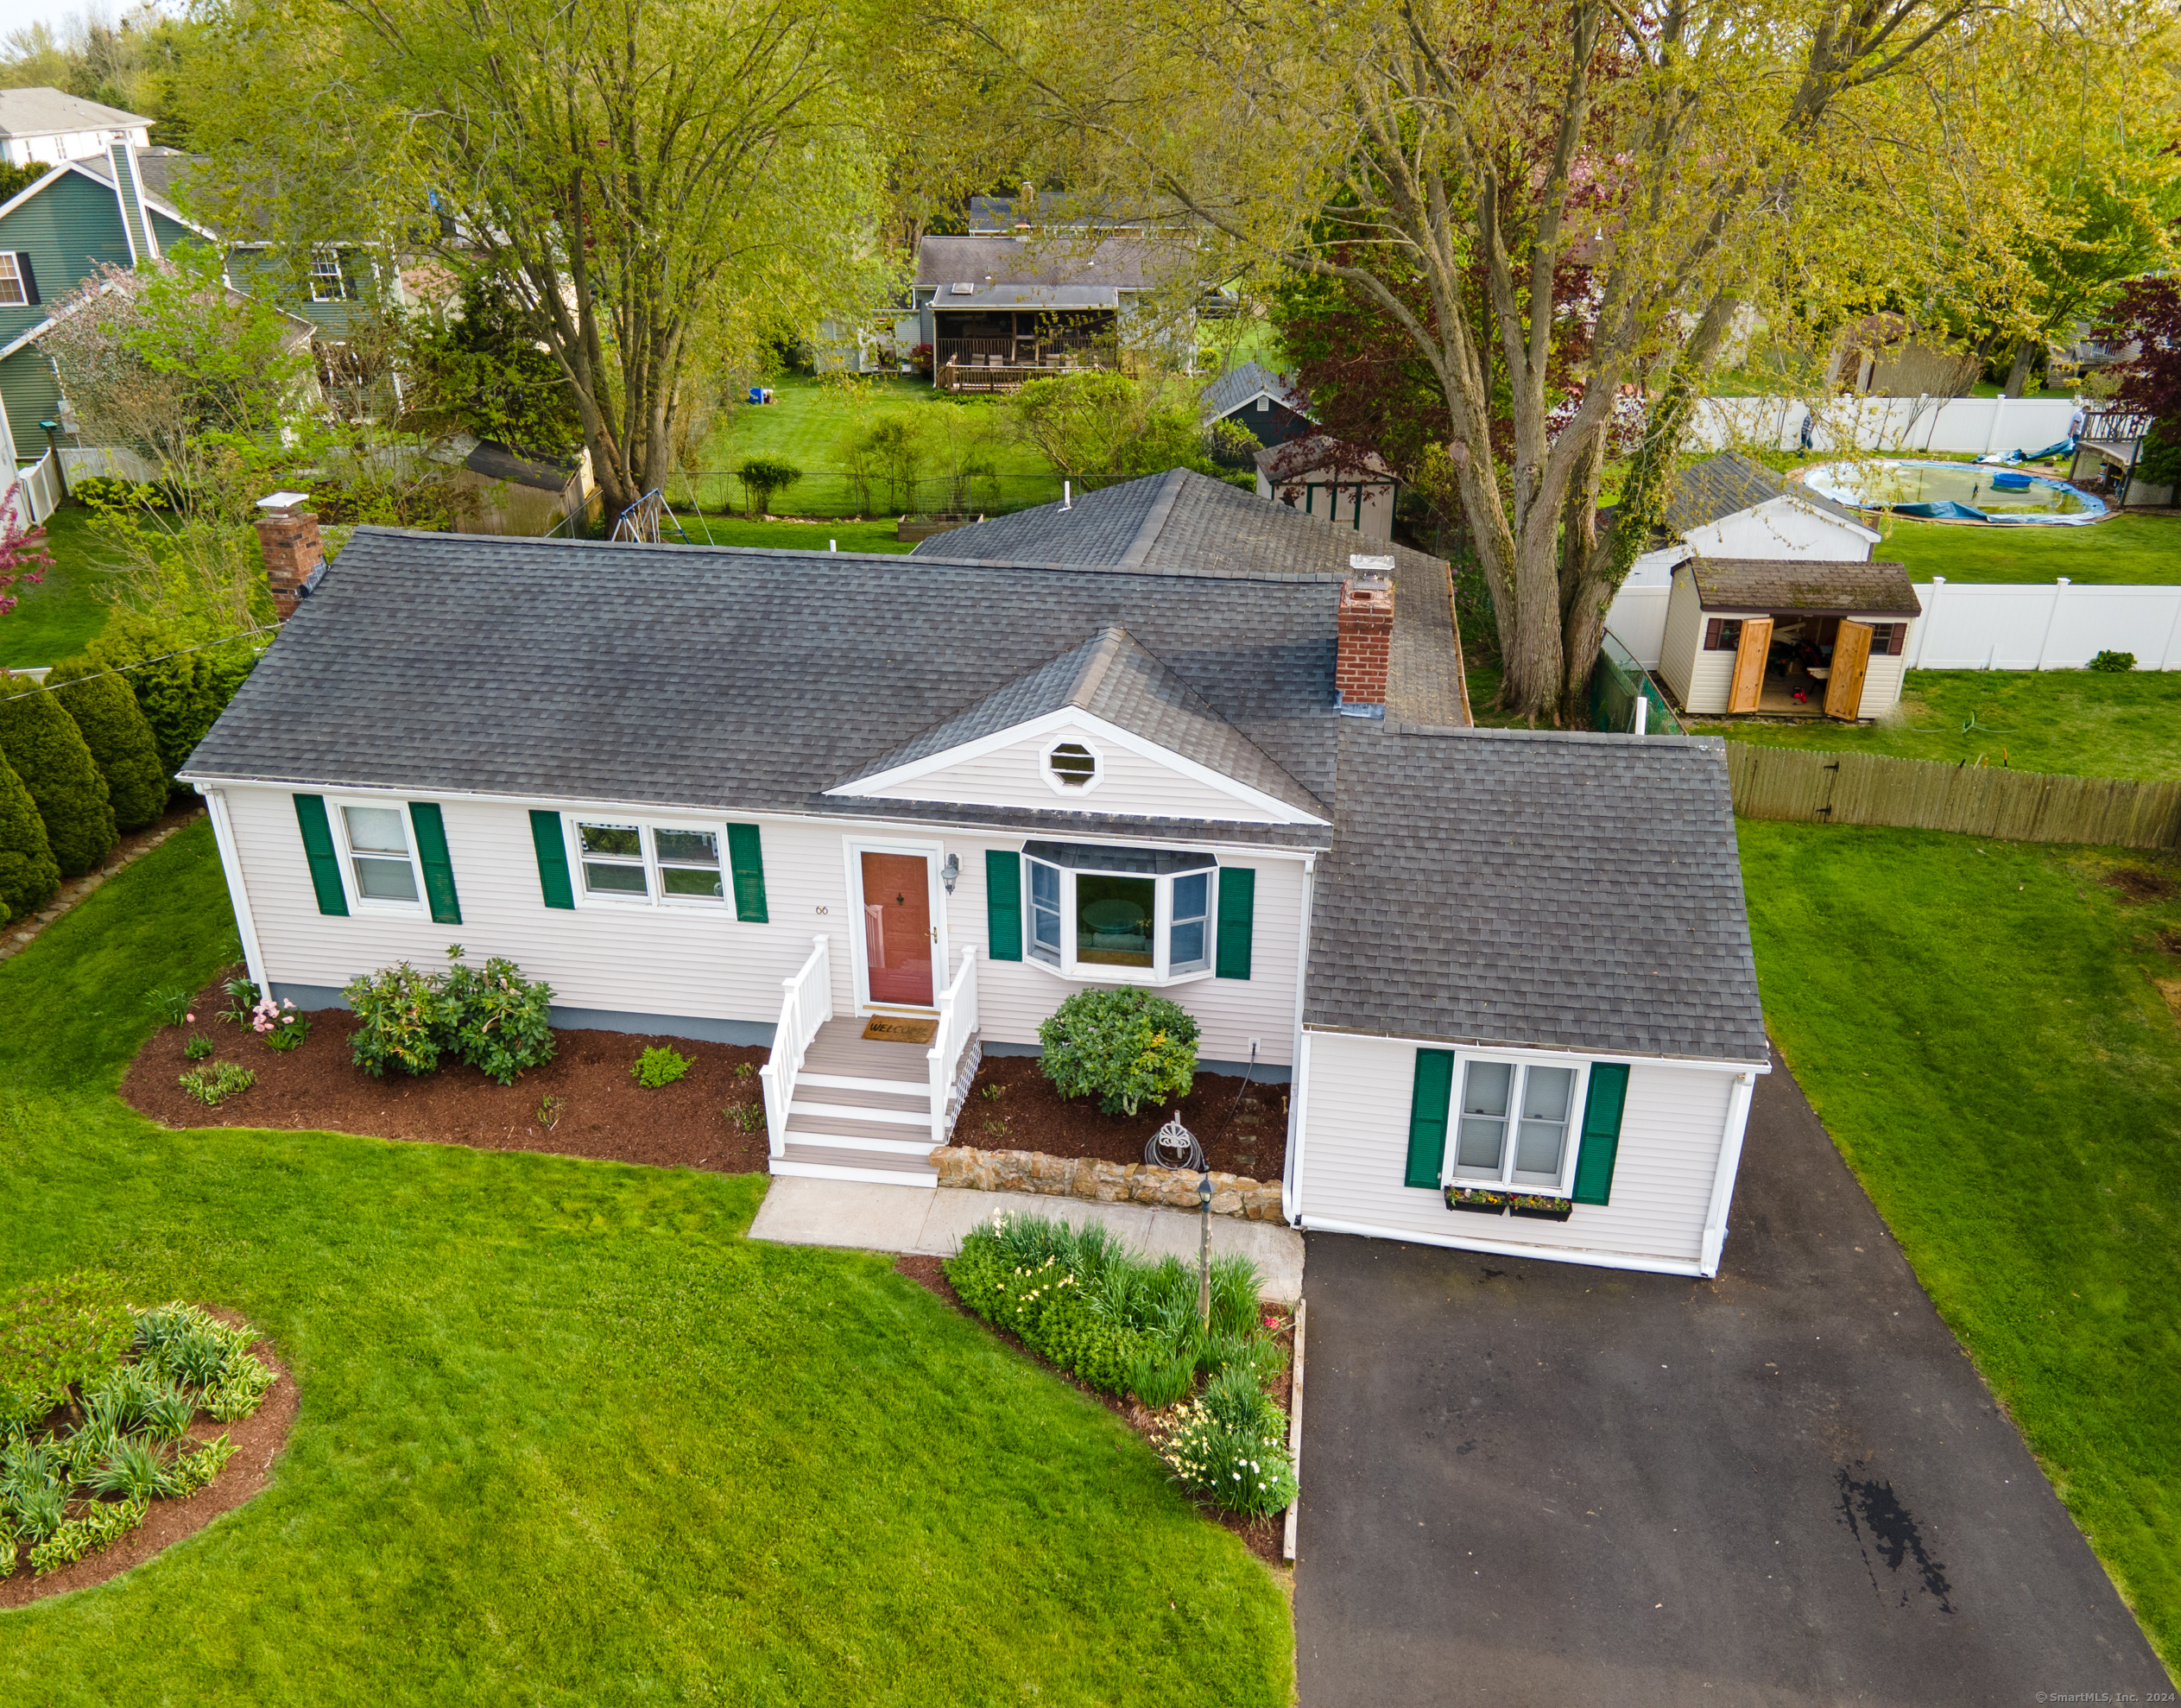 66 Todds Hill Road Branford CT